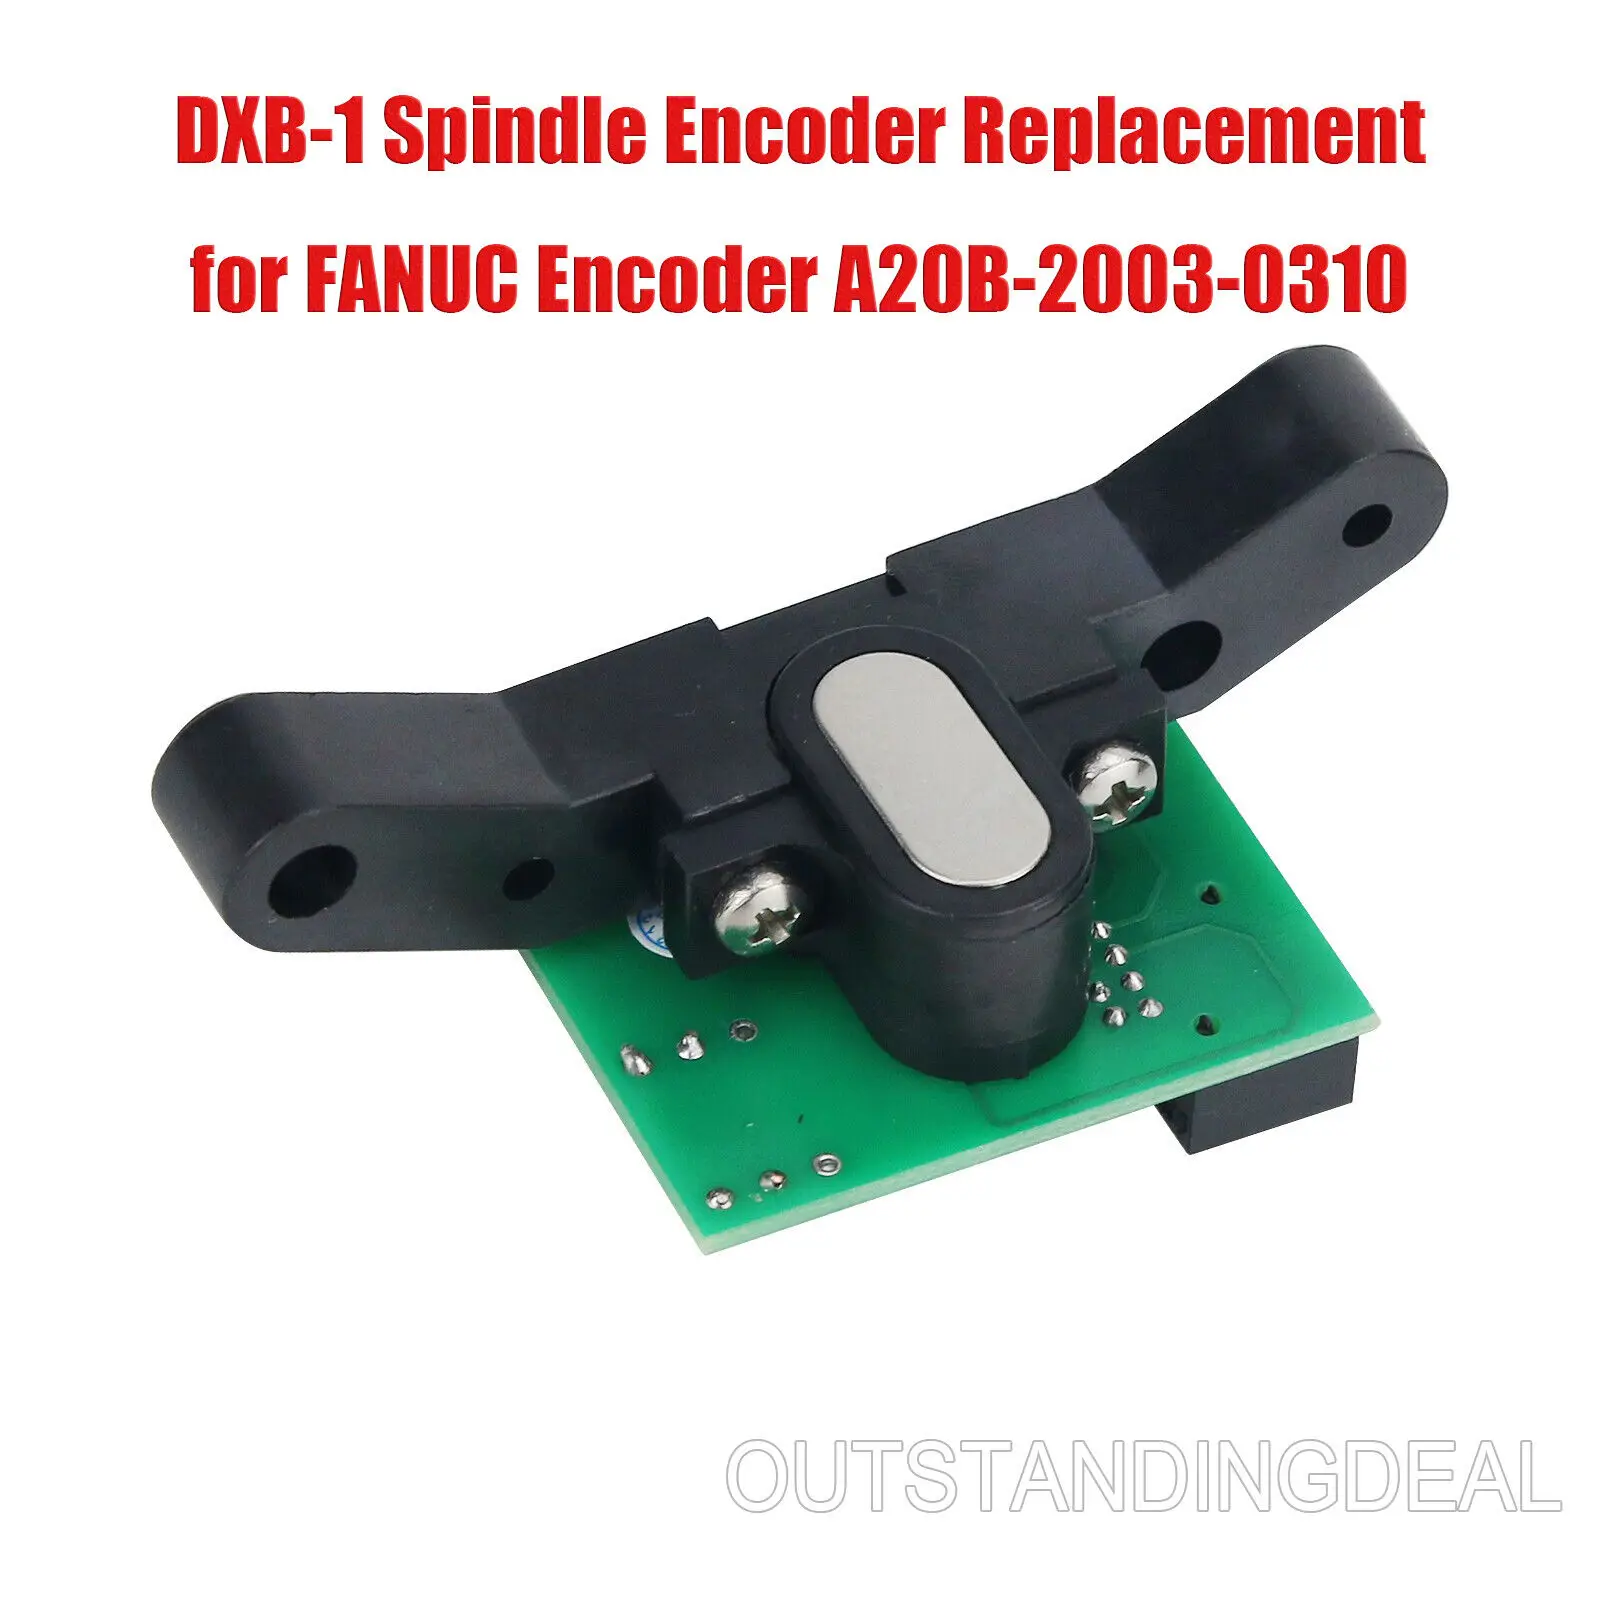 

DXB-1 Spindle Encoder for FANUC Spindle Encoder A20B-2003-0310 2-Phase Output